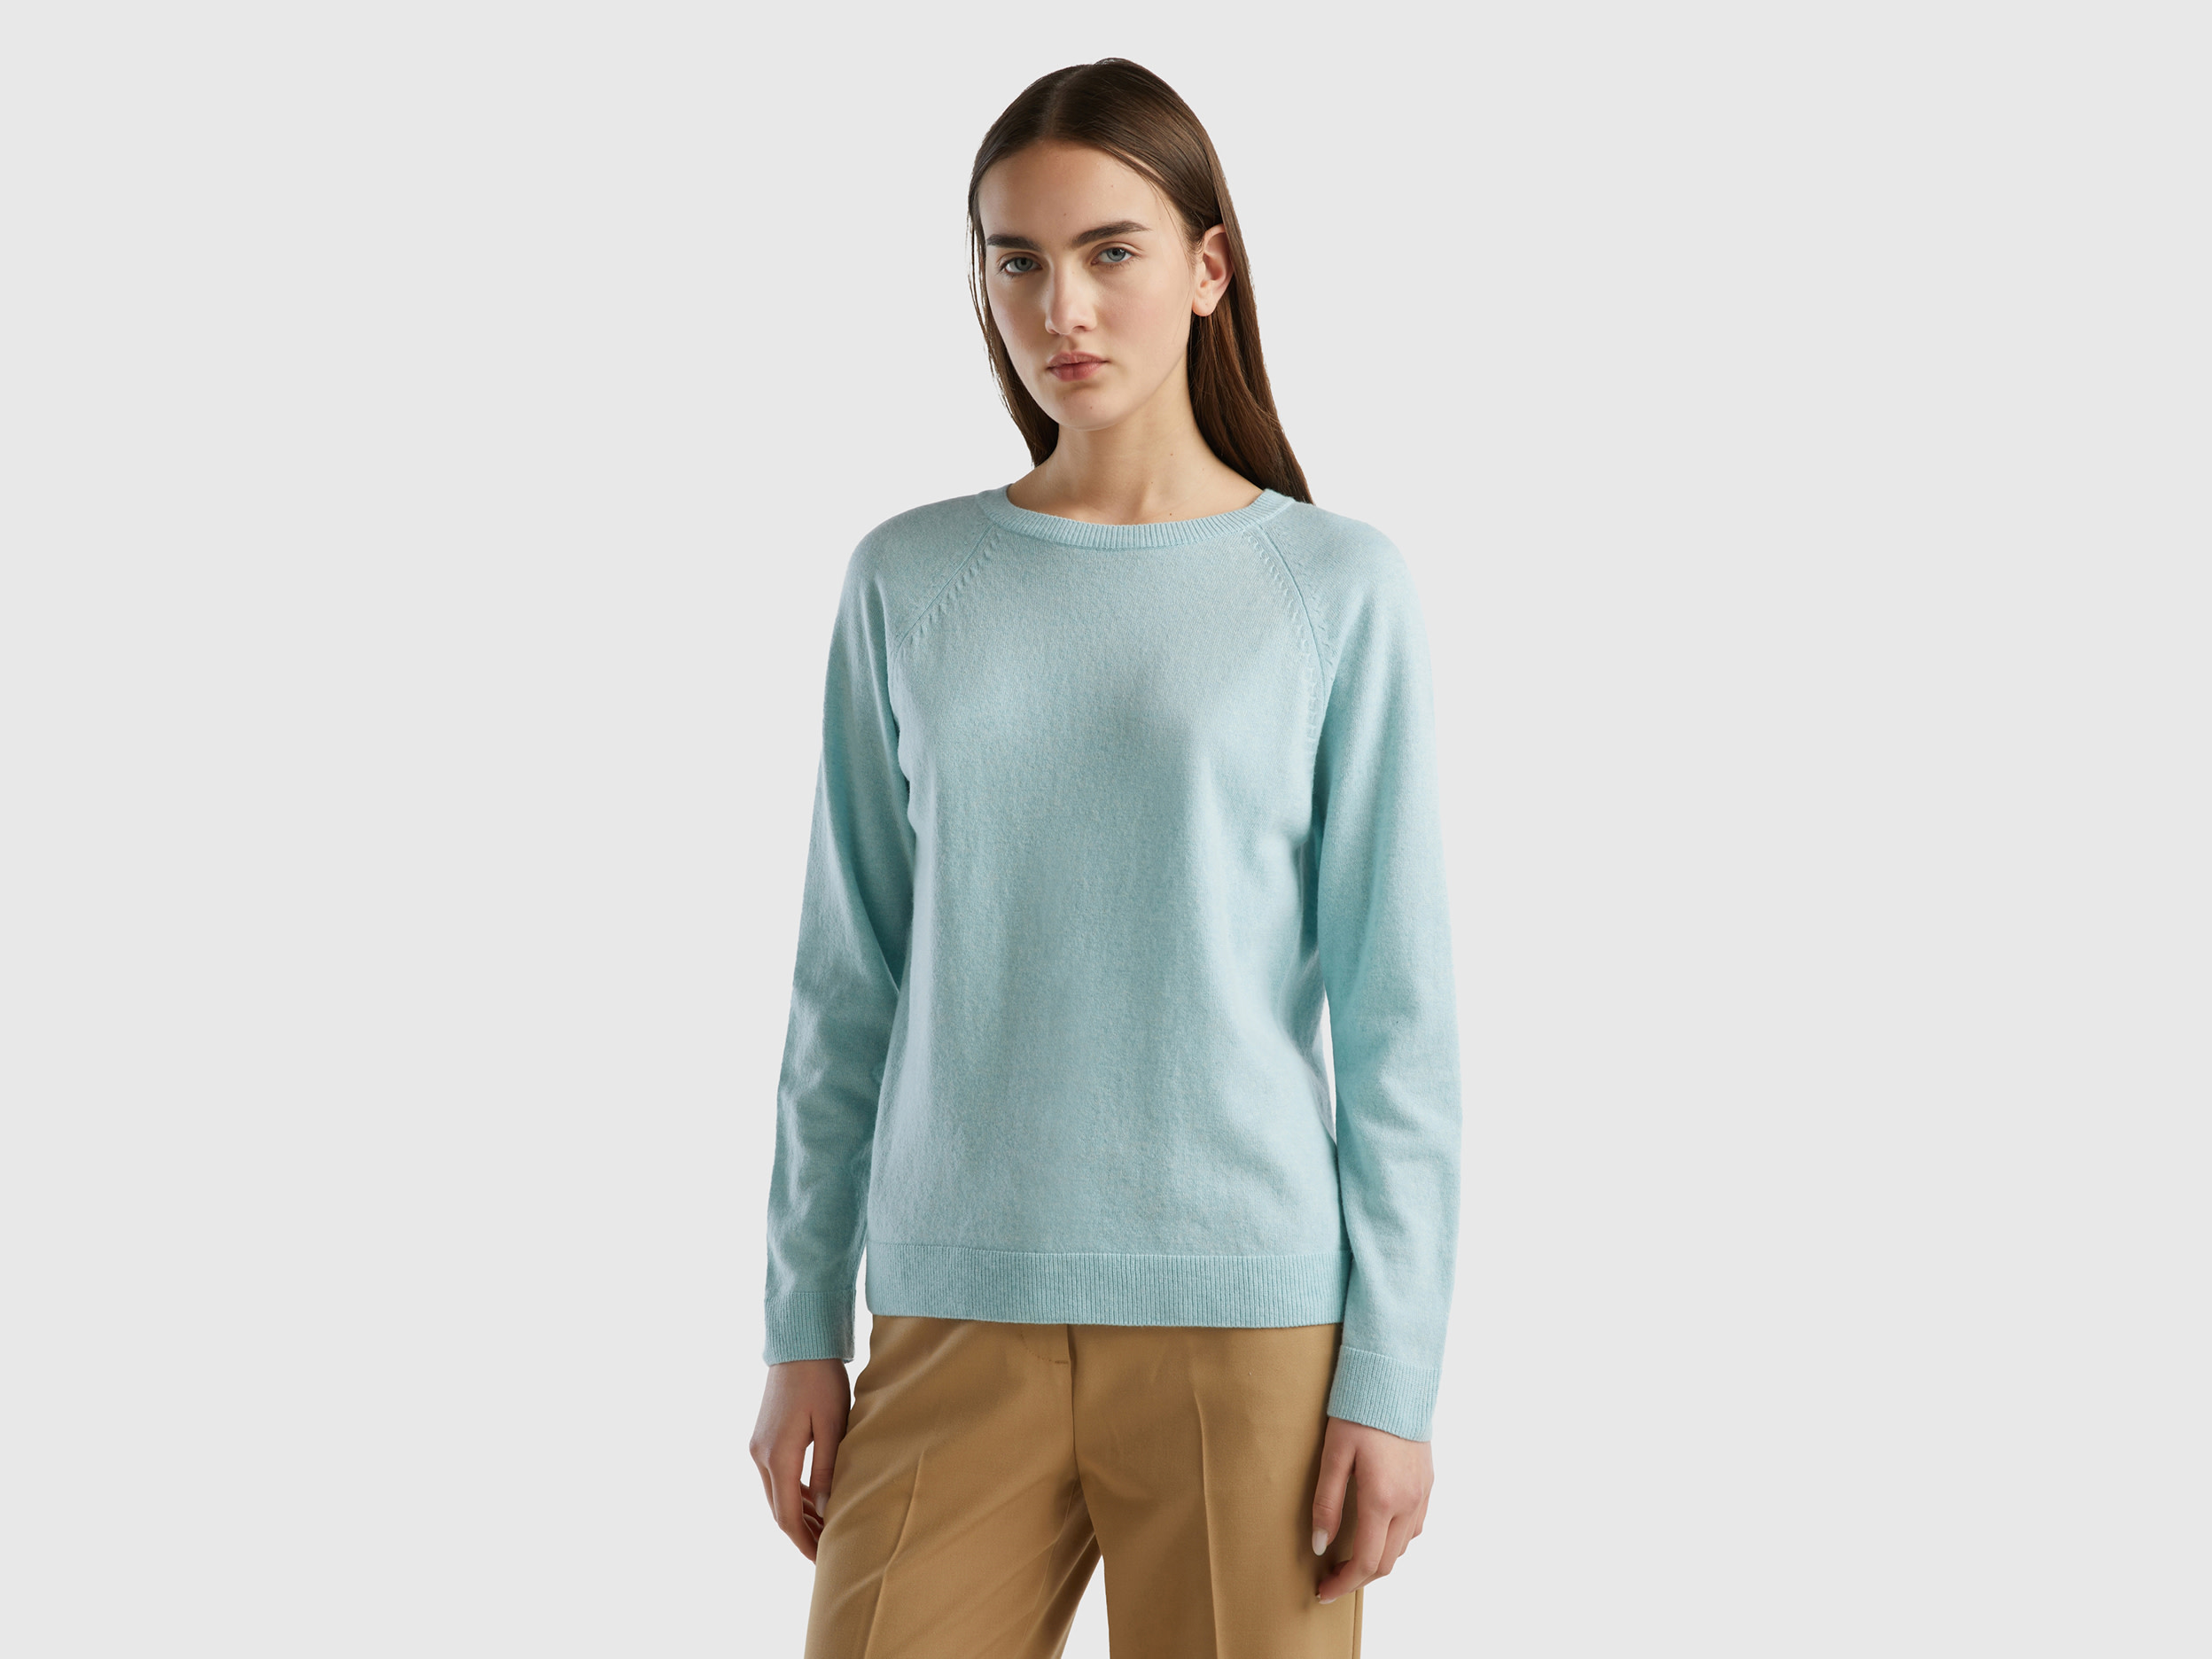 Benetton, Light Gray Crew Neck Sweater In Cashmere And Wool Blend, size M, Light Gray, Women